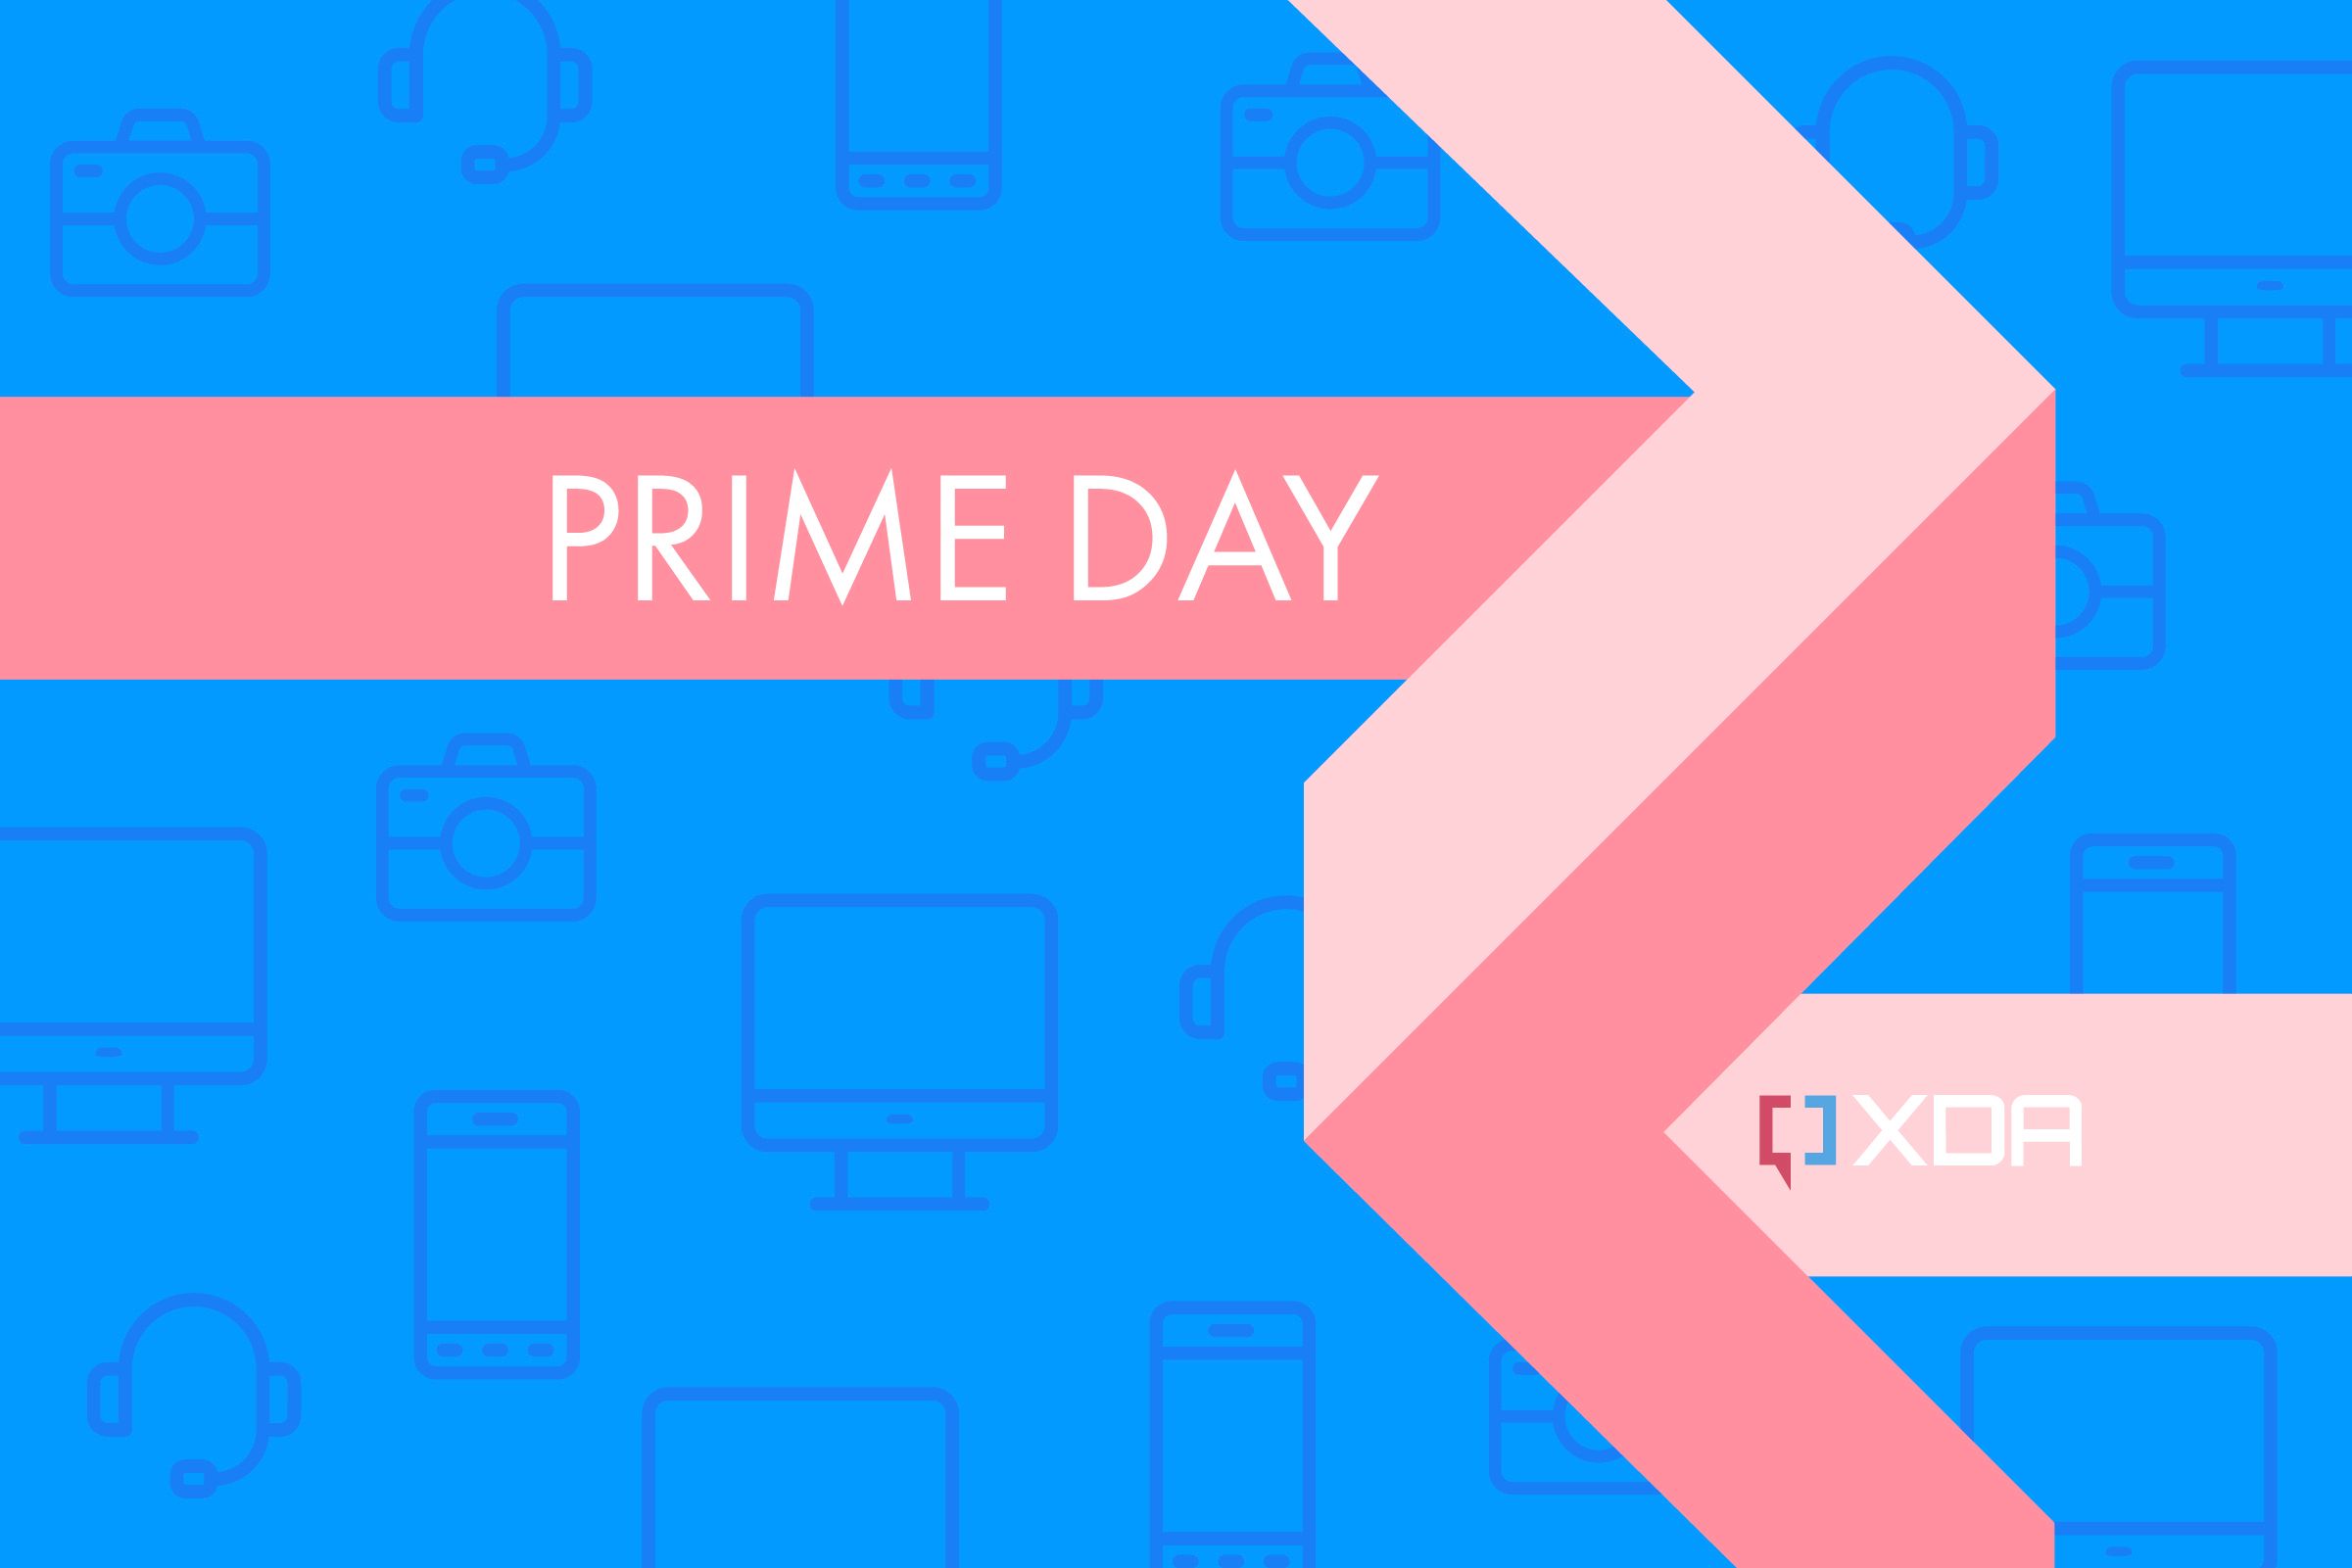 Prime Day will feature tons of limited-time 'Lightning